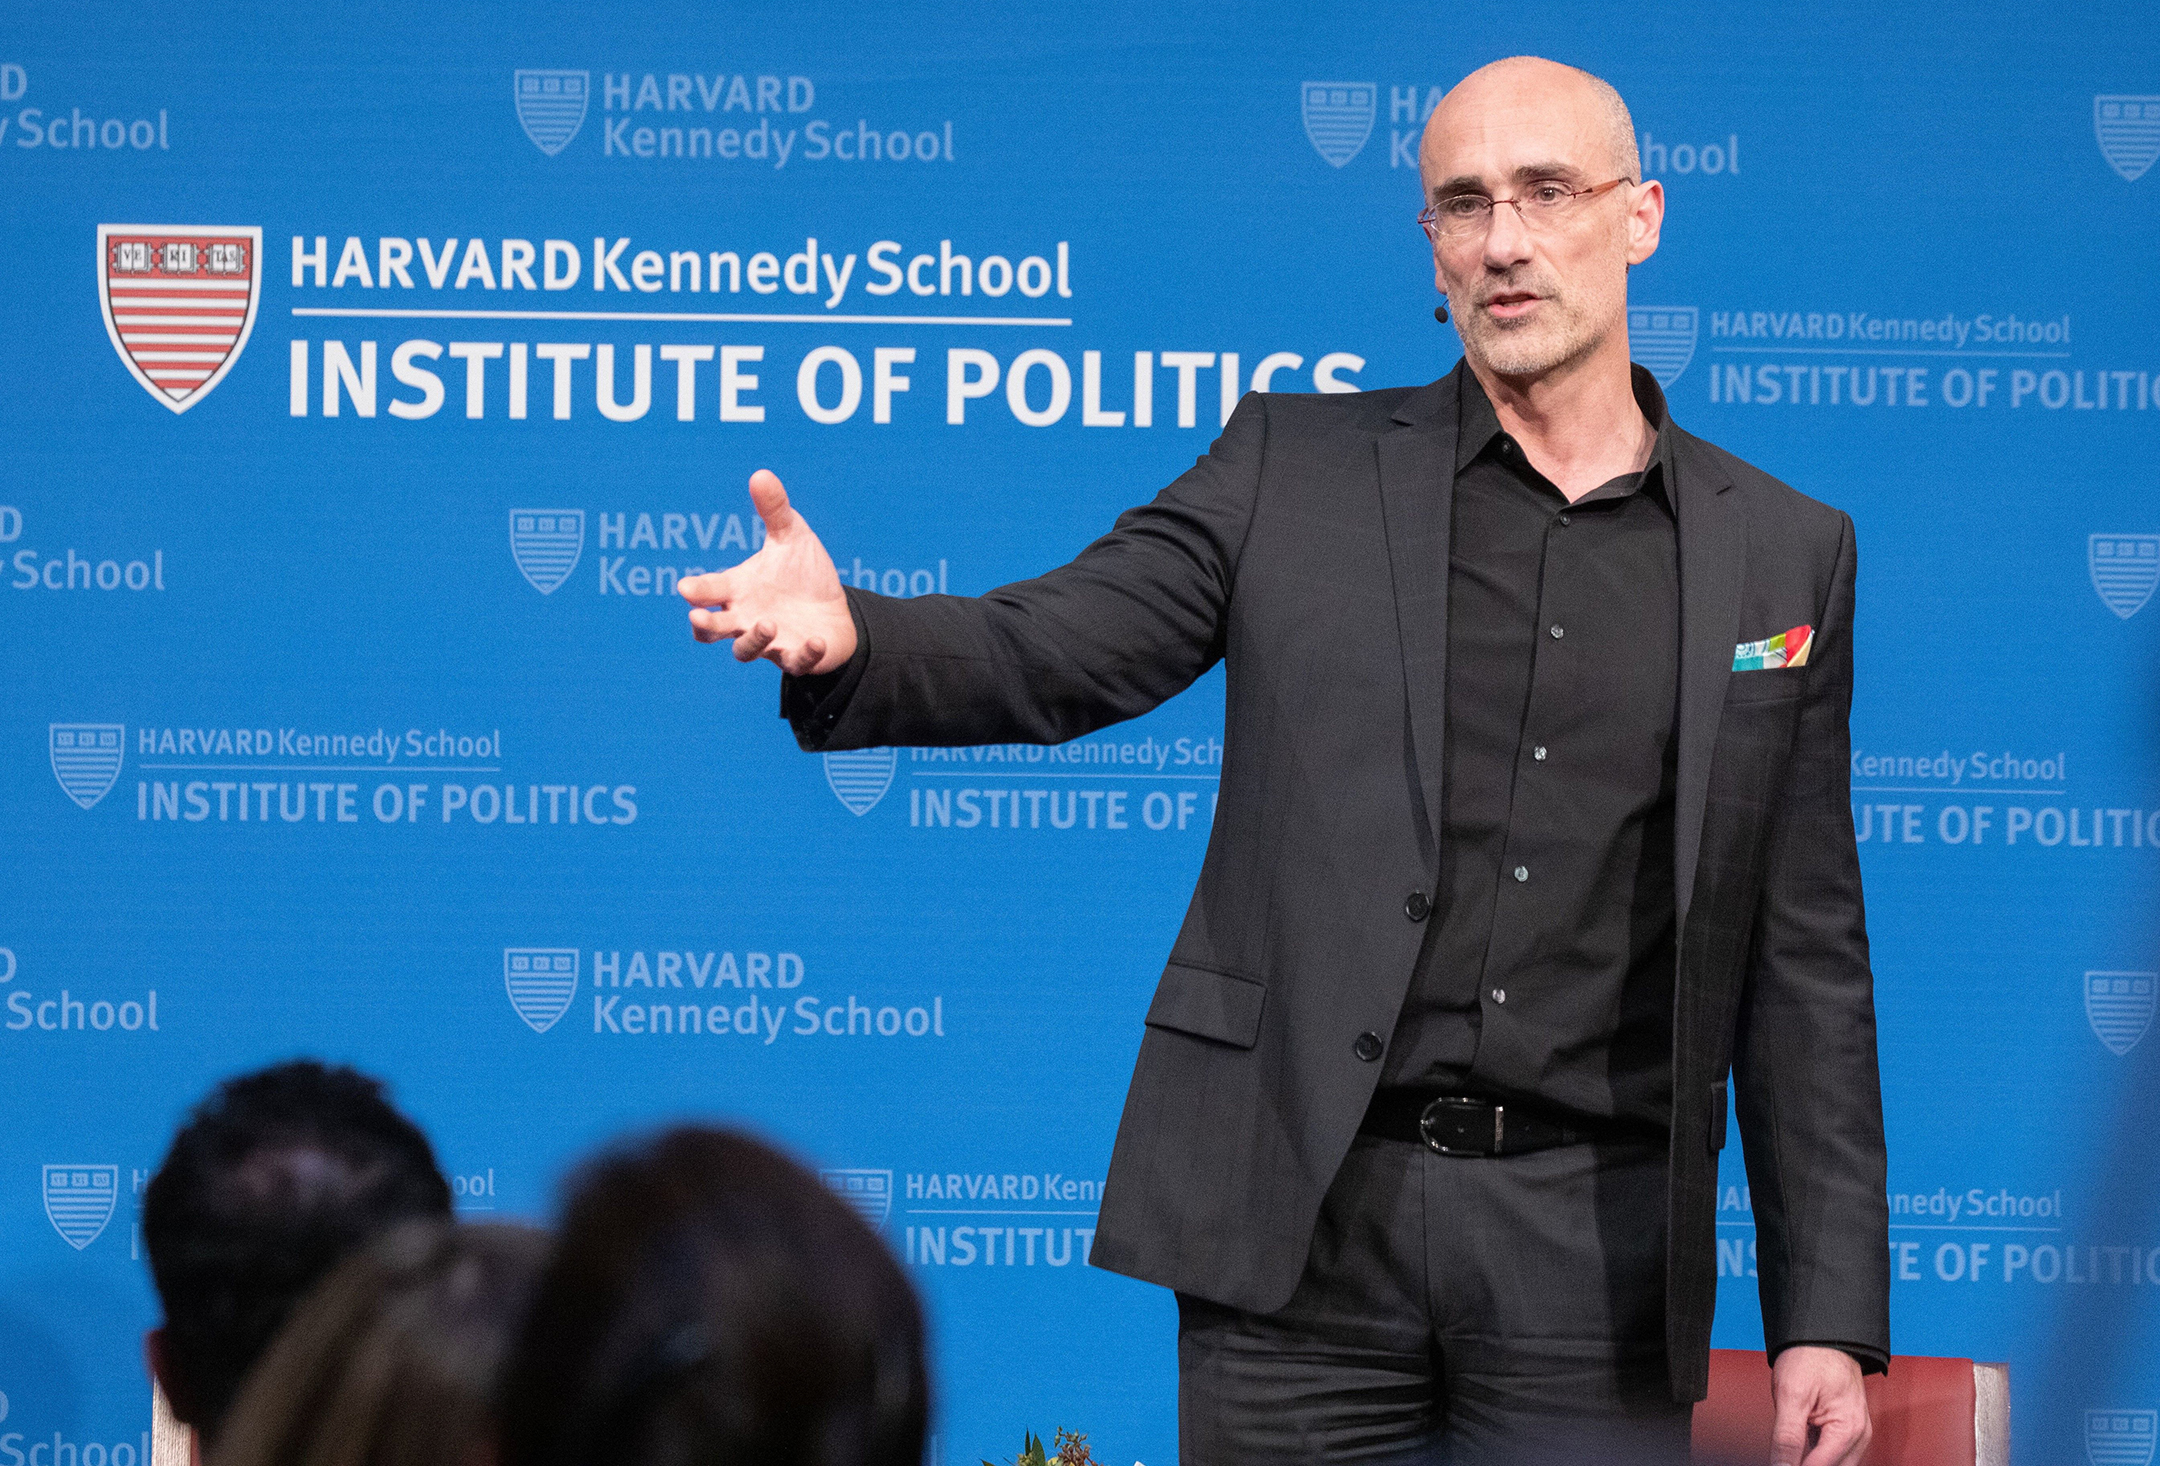 Photo of a man in a black blazer, black button-down shirt, and black pants speaking to a crowd in front of a backdrop that reads Harvard Kennedy School Institute of Politics